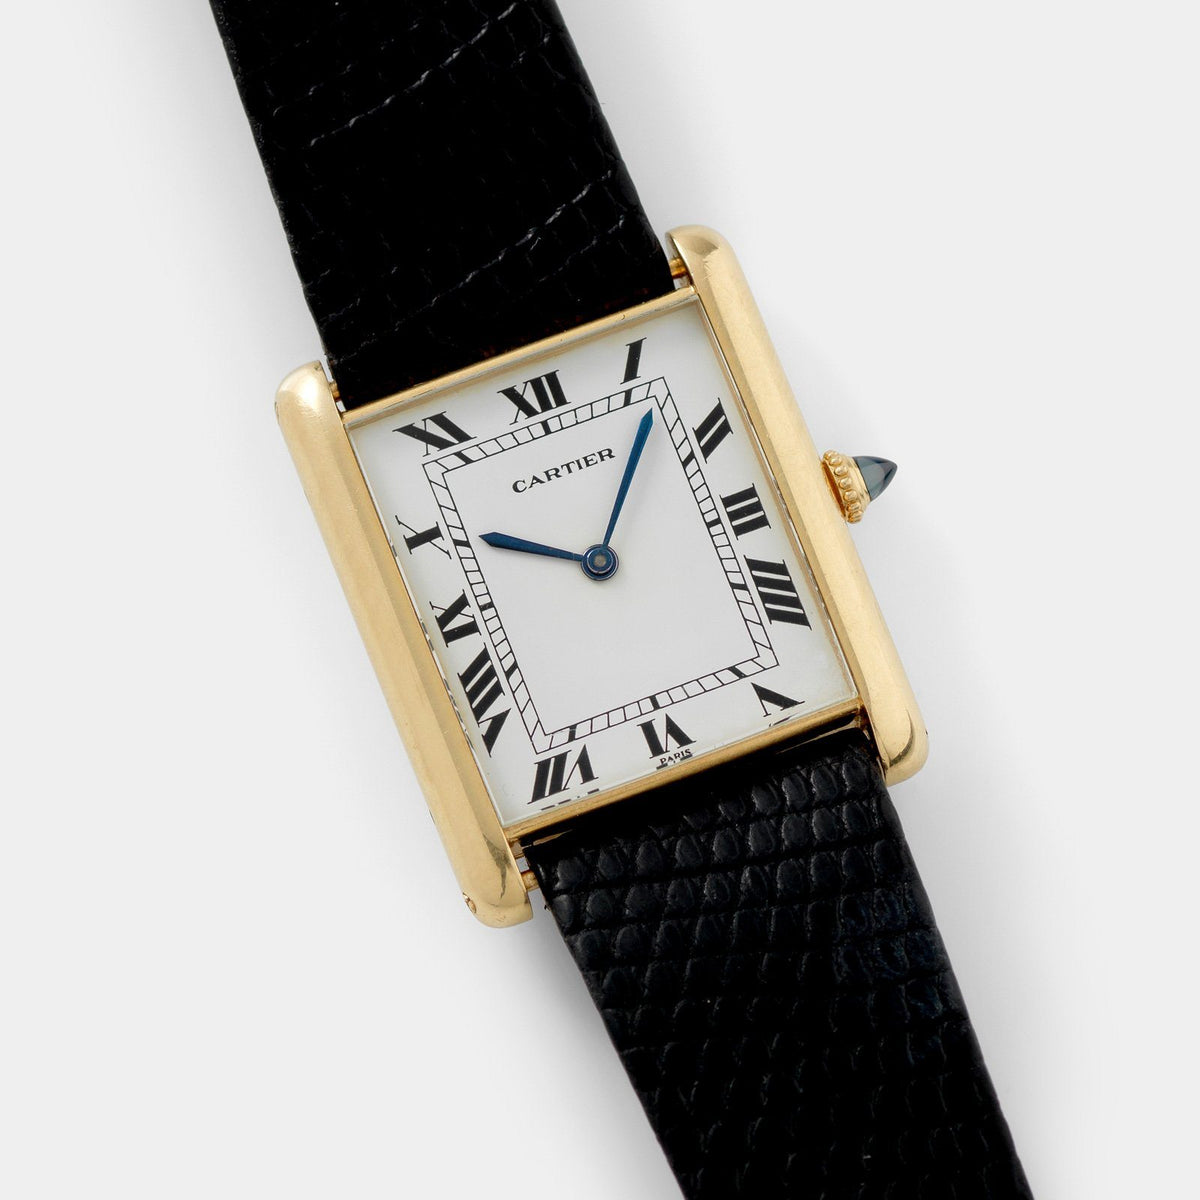 Cartier TANK AMÉRICAINE XL. Ref 2926. 18K Yellow Gold. Automatic. Box &  Papers 